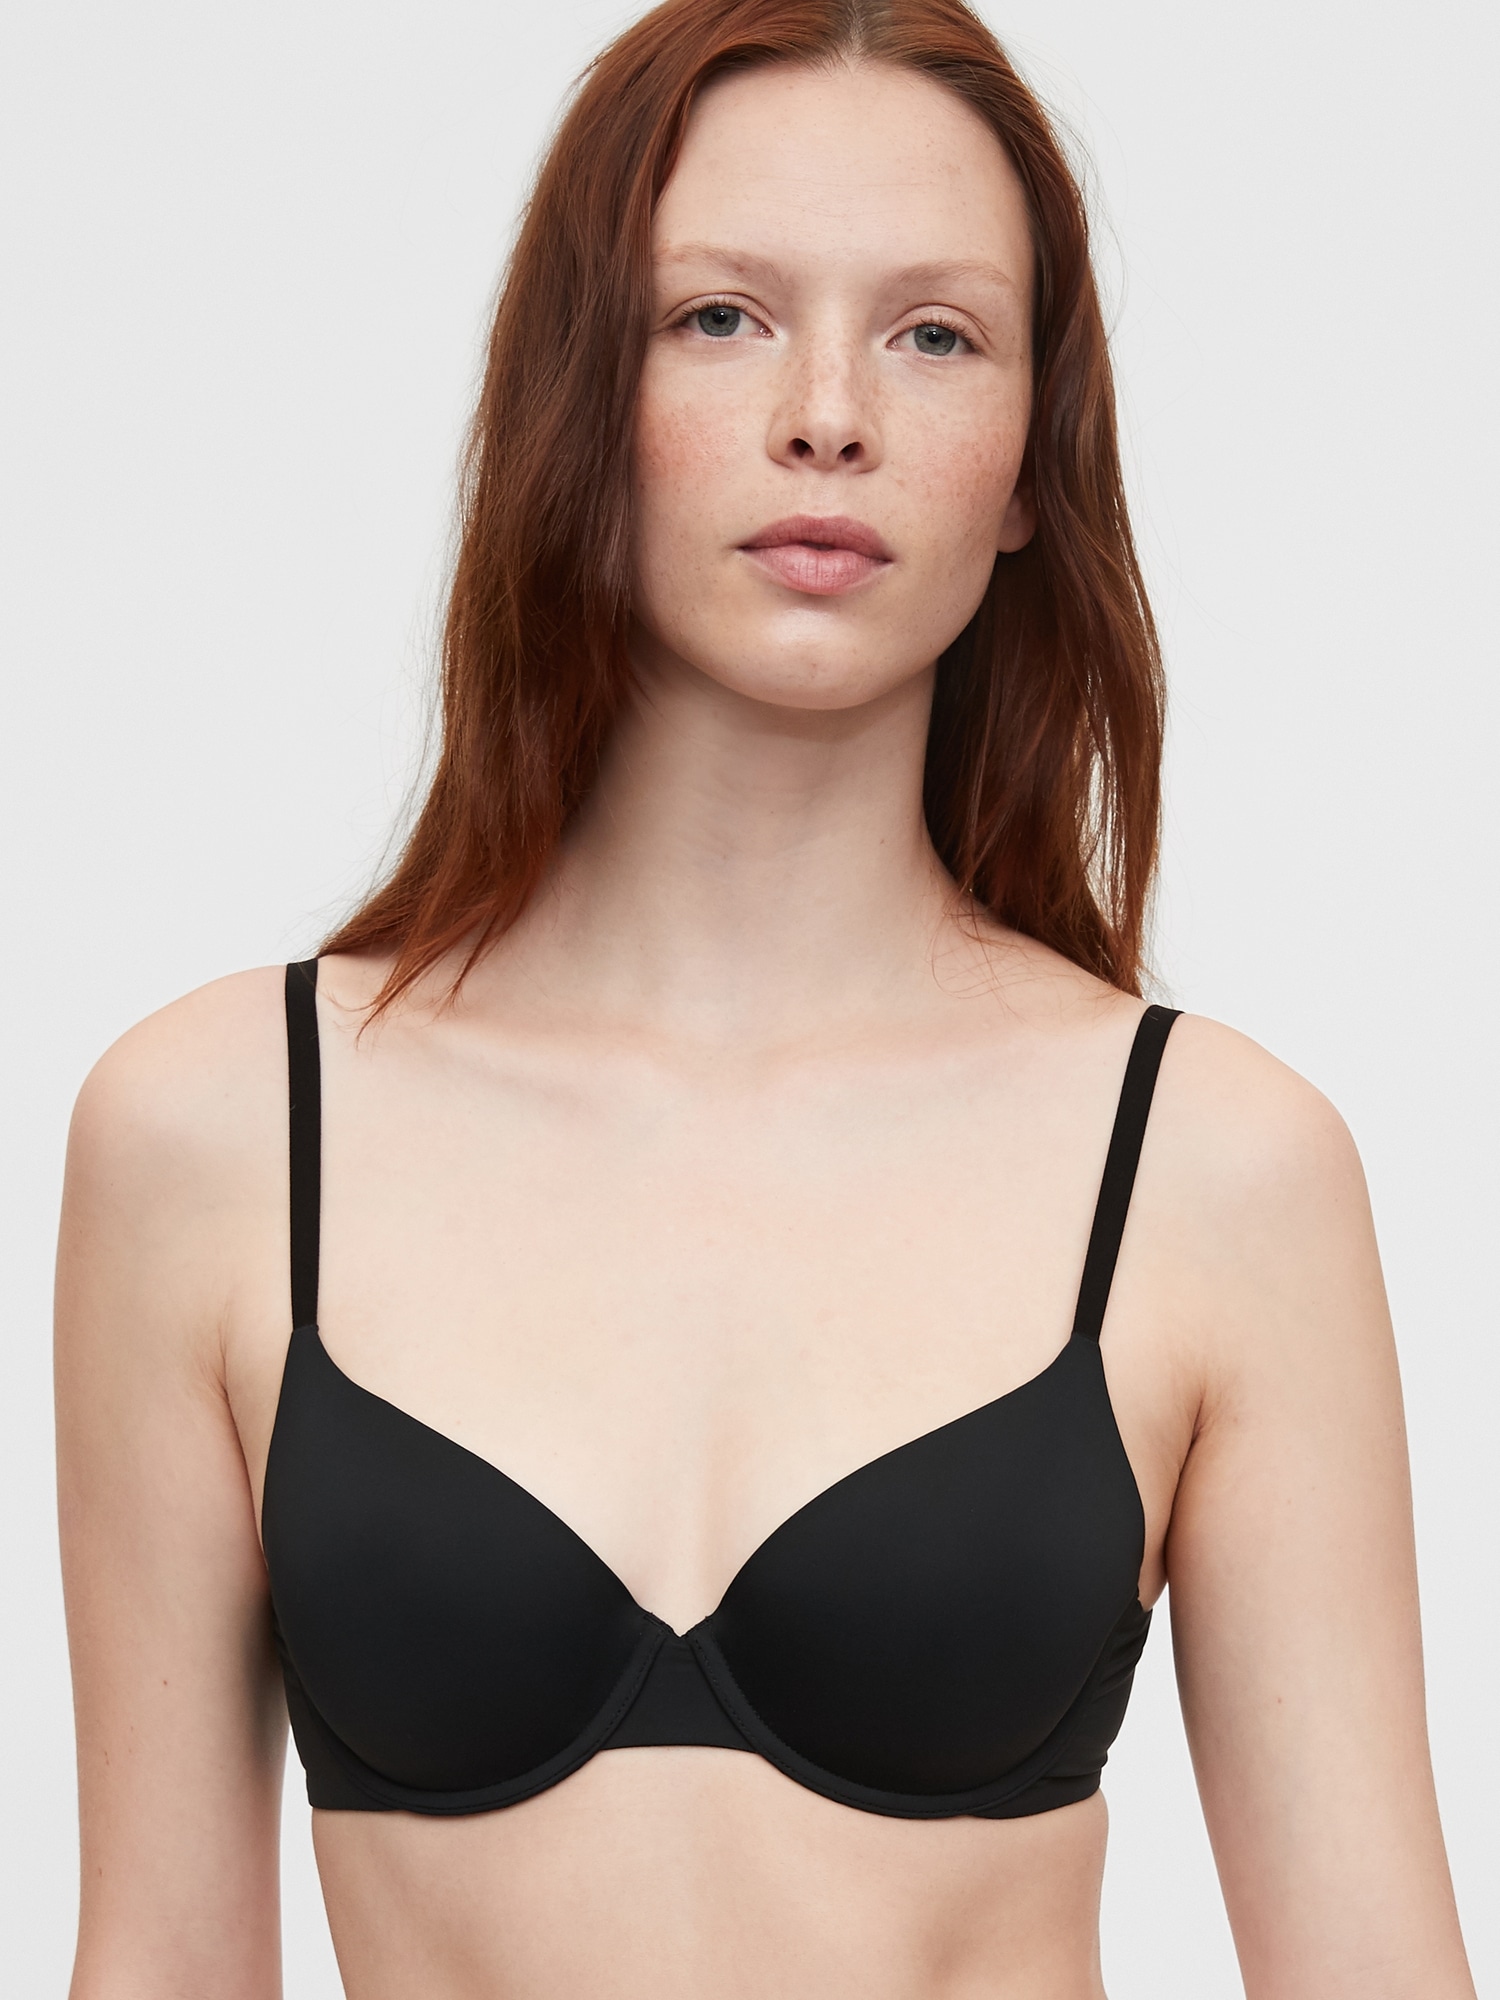 Please recommend a t shirt bra for soft splayed boobs. 36DDD